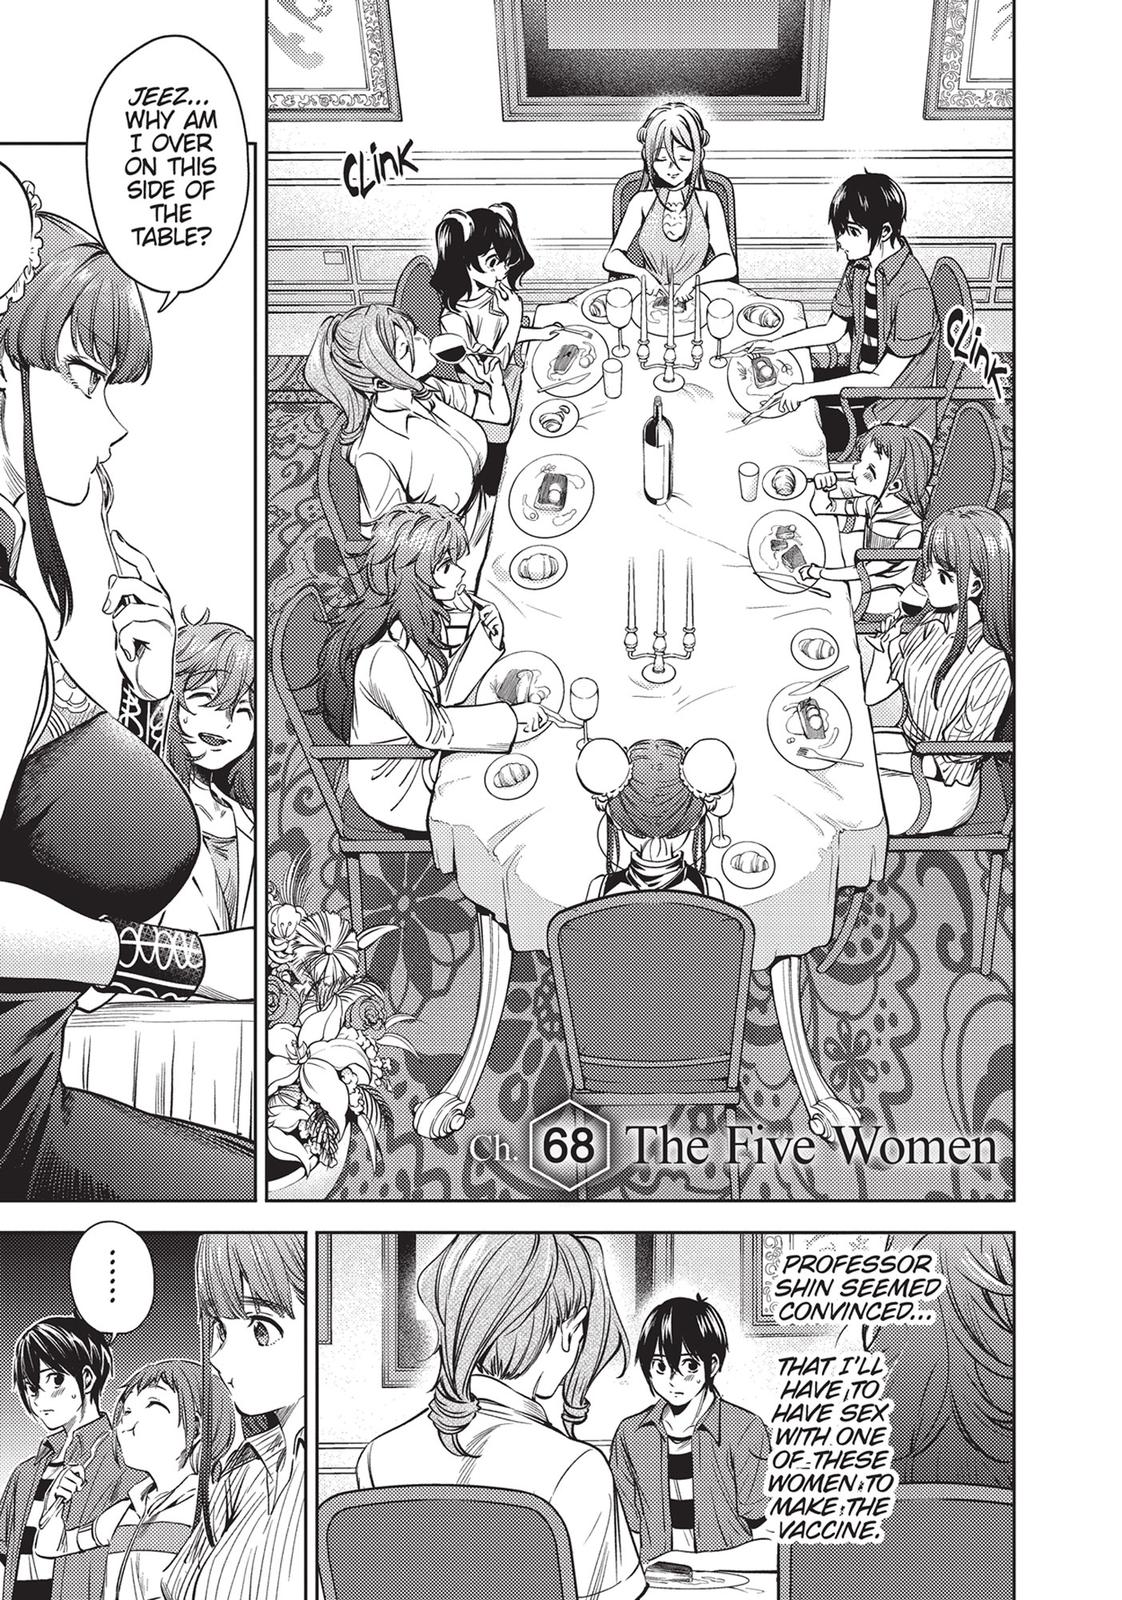 World's End Harem, Chapter 79  TcbScans Net - TCBscans - Free Manga Online  in High Quality